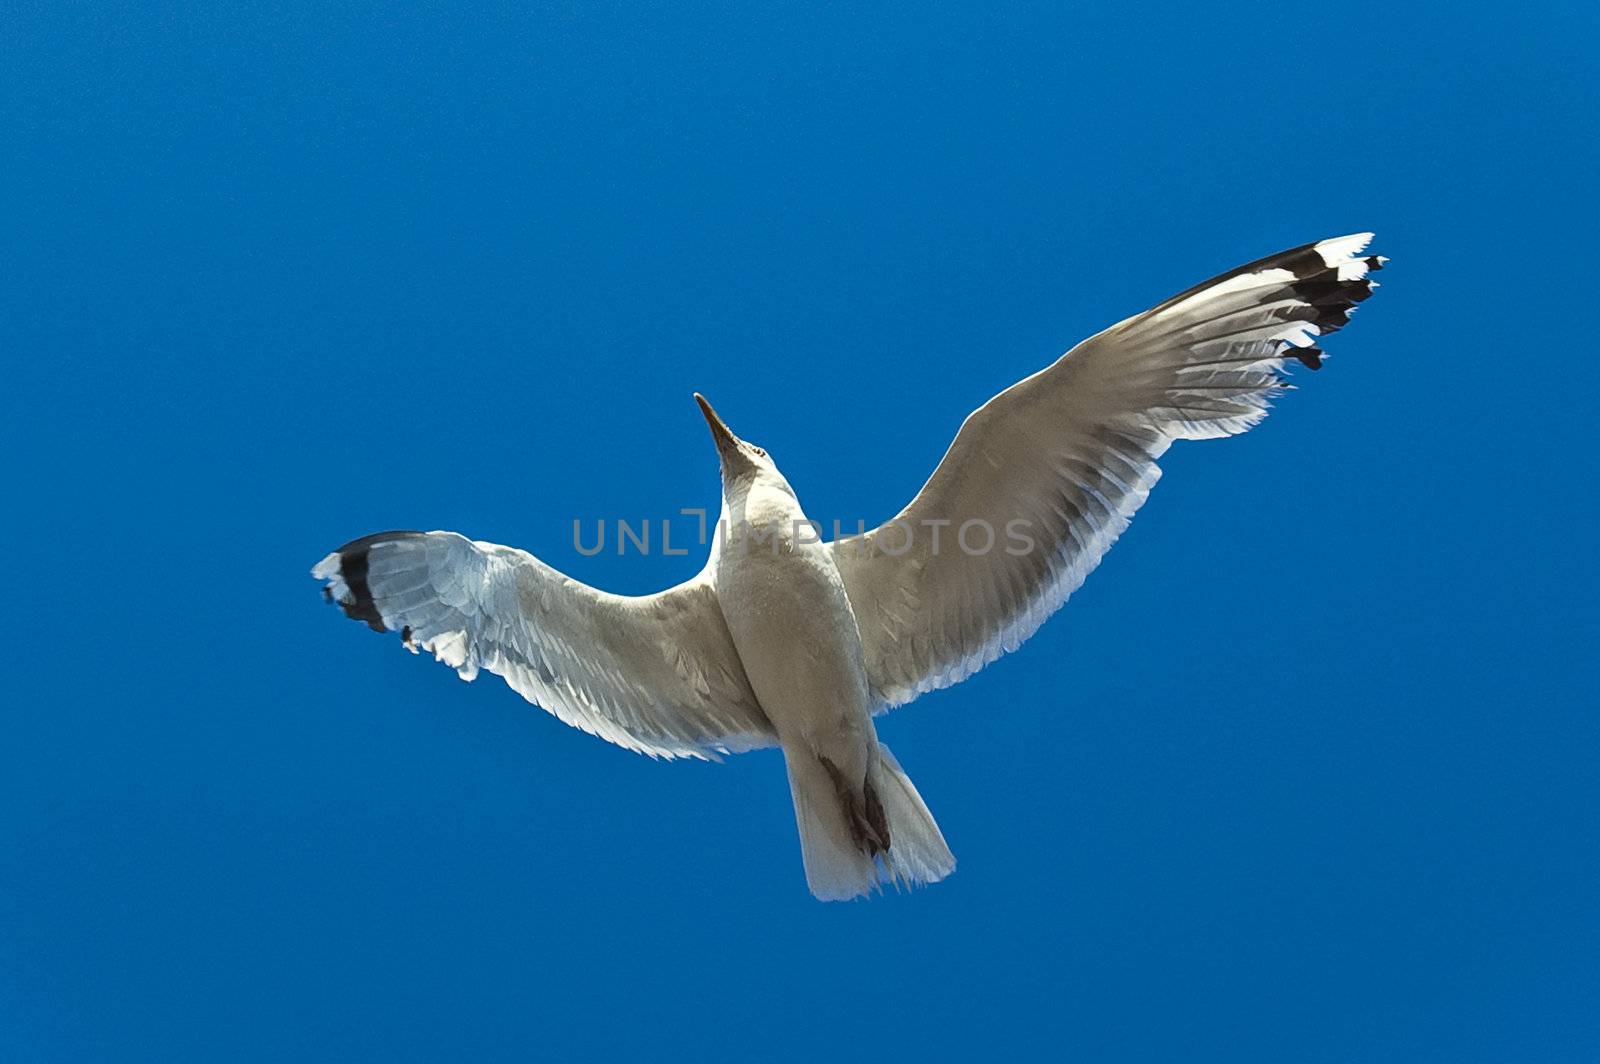 Seagull flying in a cloudless blue sky